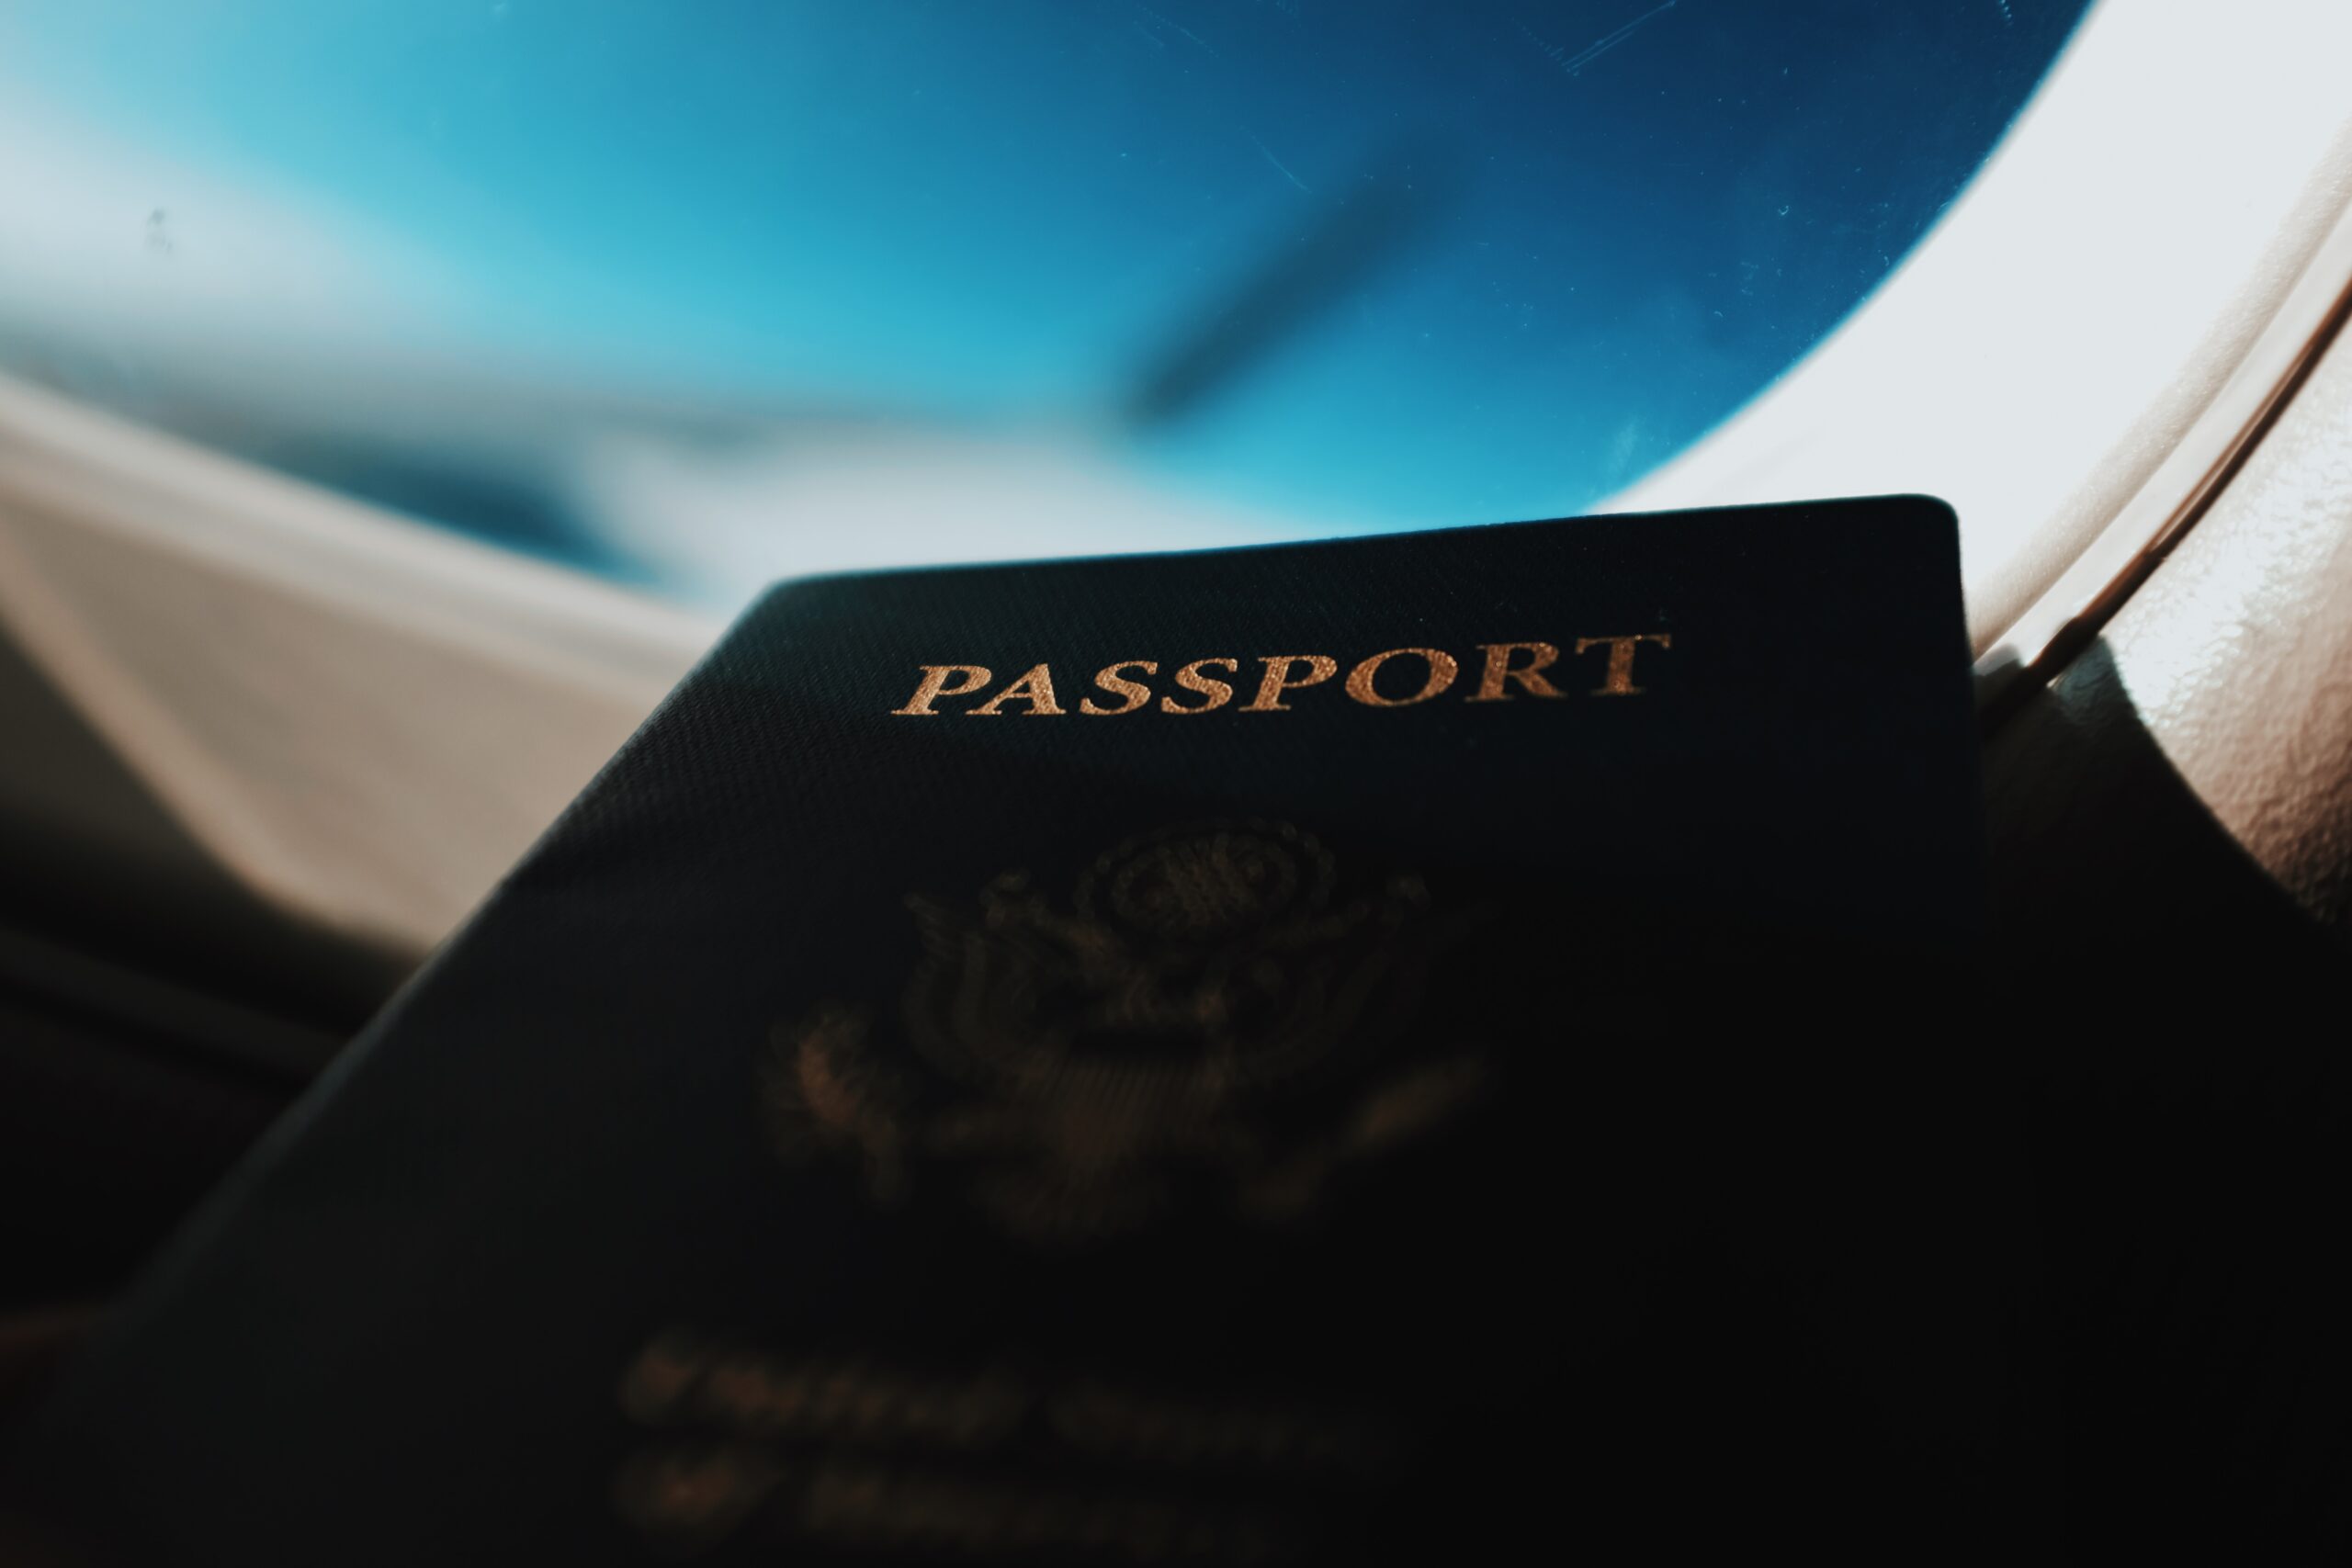 Passport representing an explanation on express entry